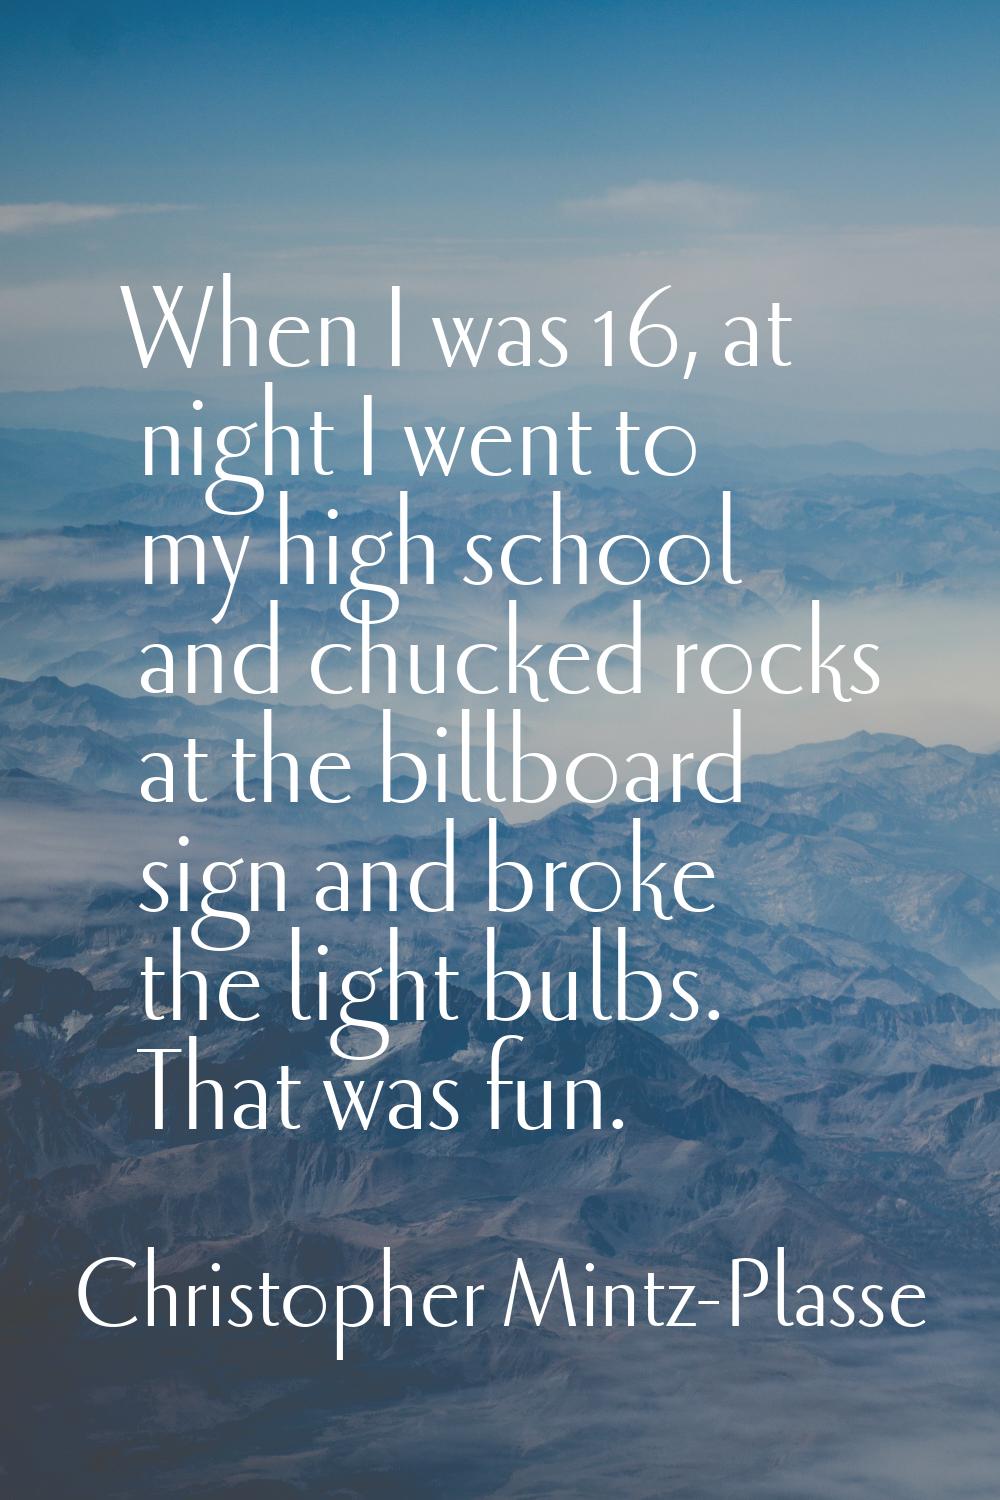 When I was 16, at night I went to my high school and chucked rocks at the billboard sign and broke 